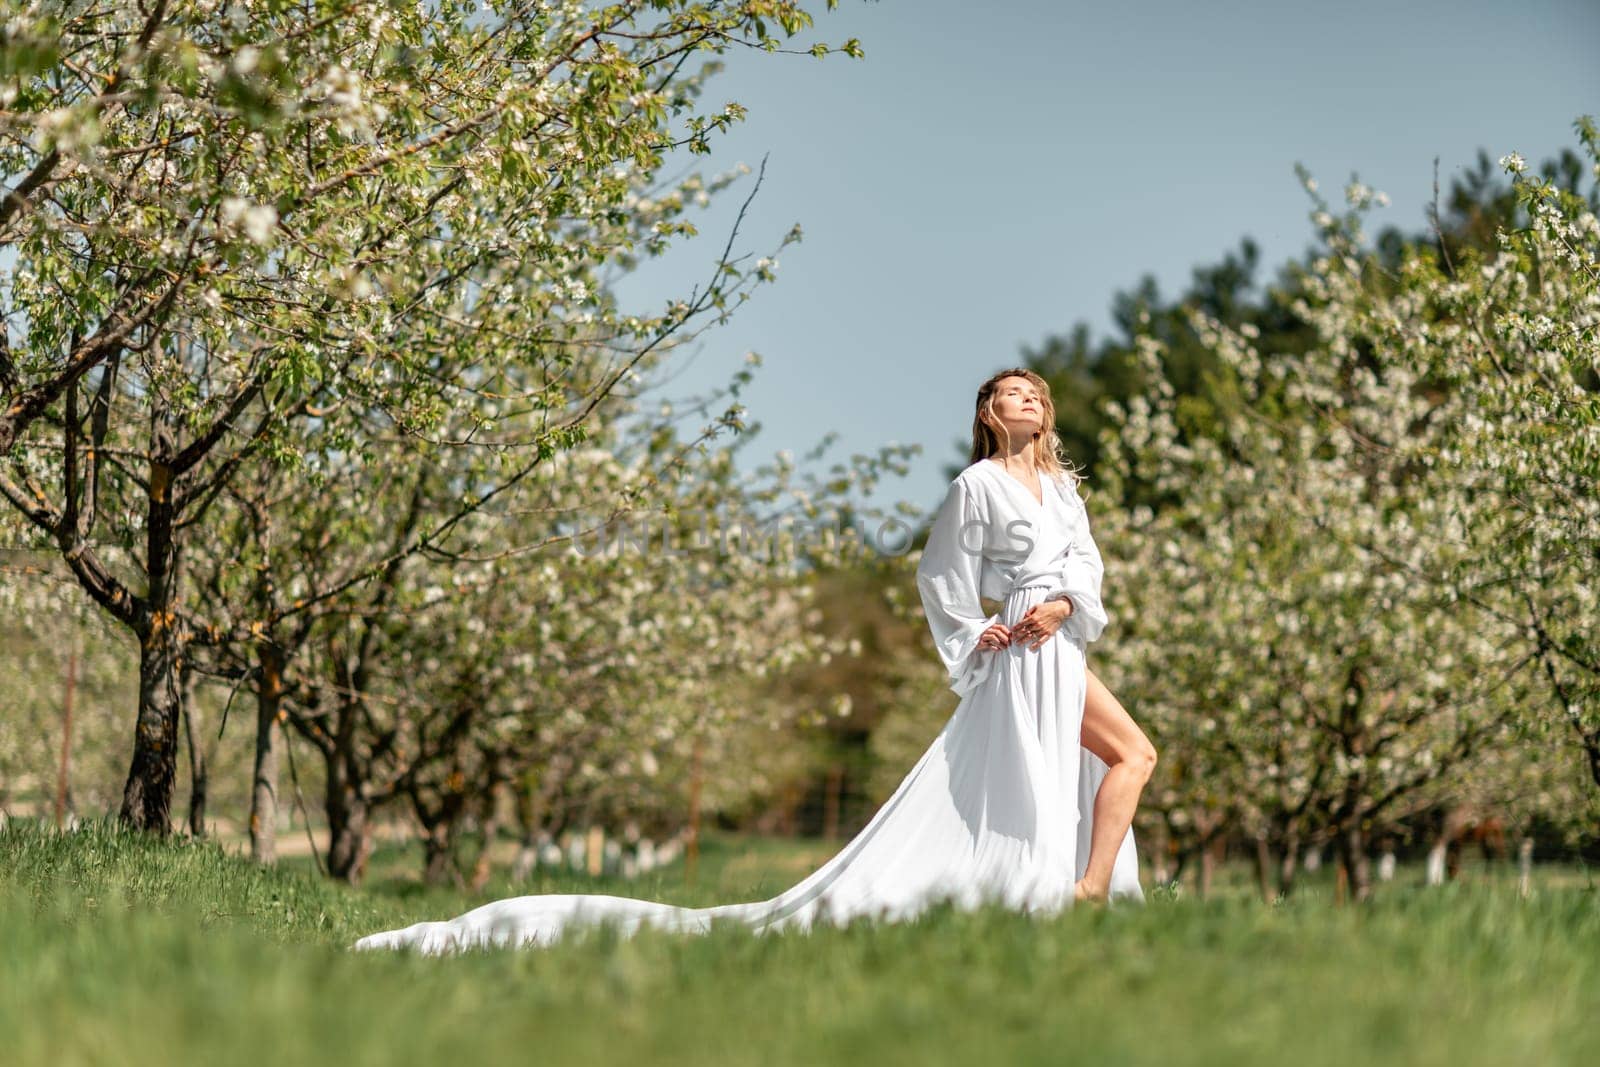 Blond blooming garden. A woman in a white dress walks through a blossoming cherry orchard. Long dress flies to the sides